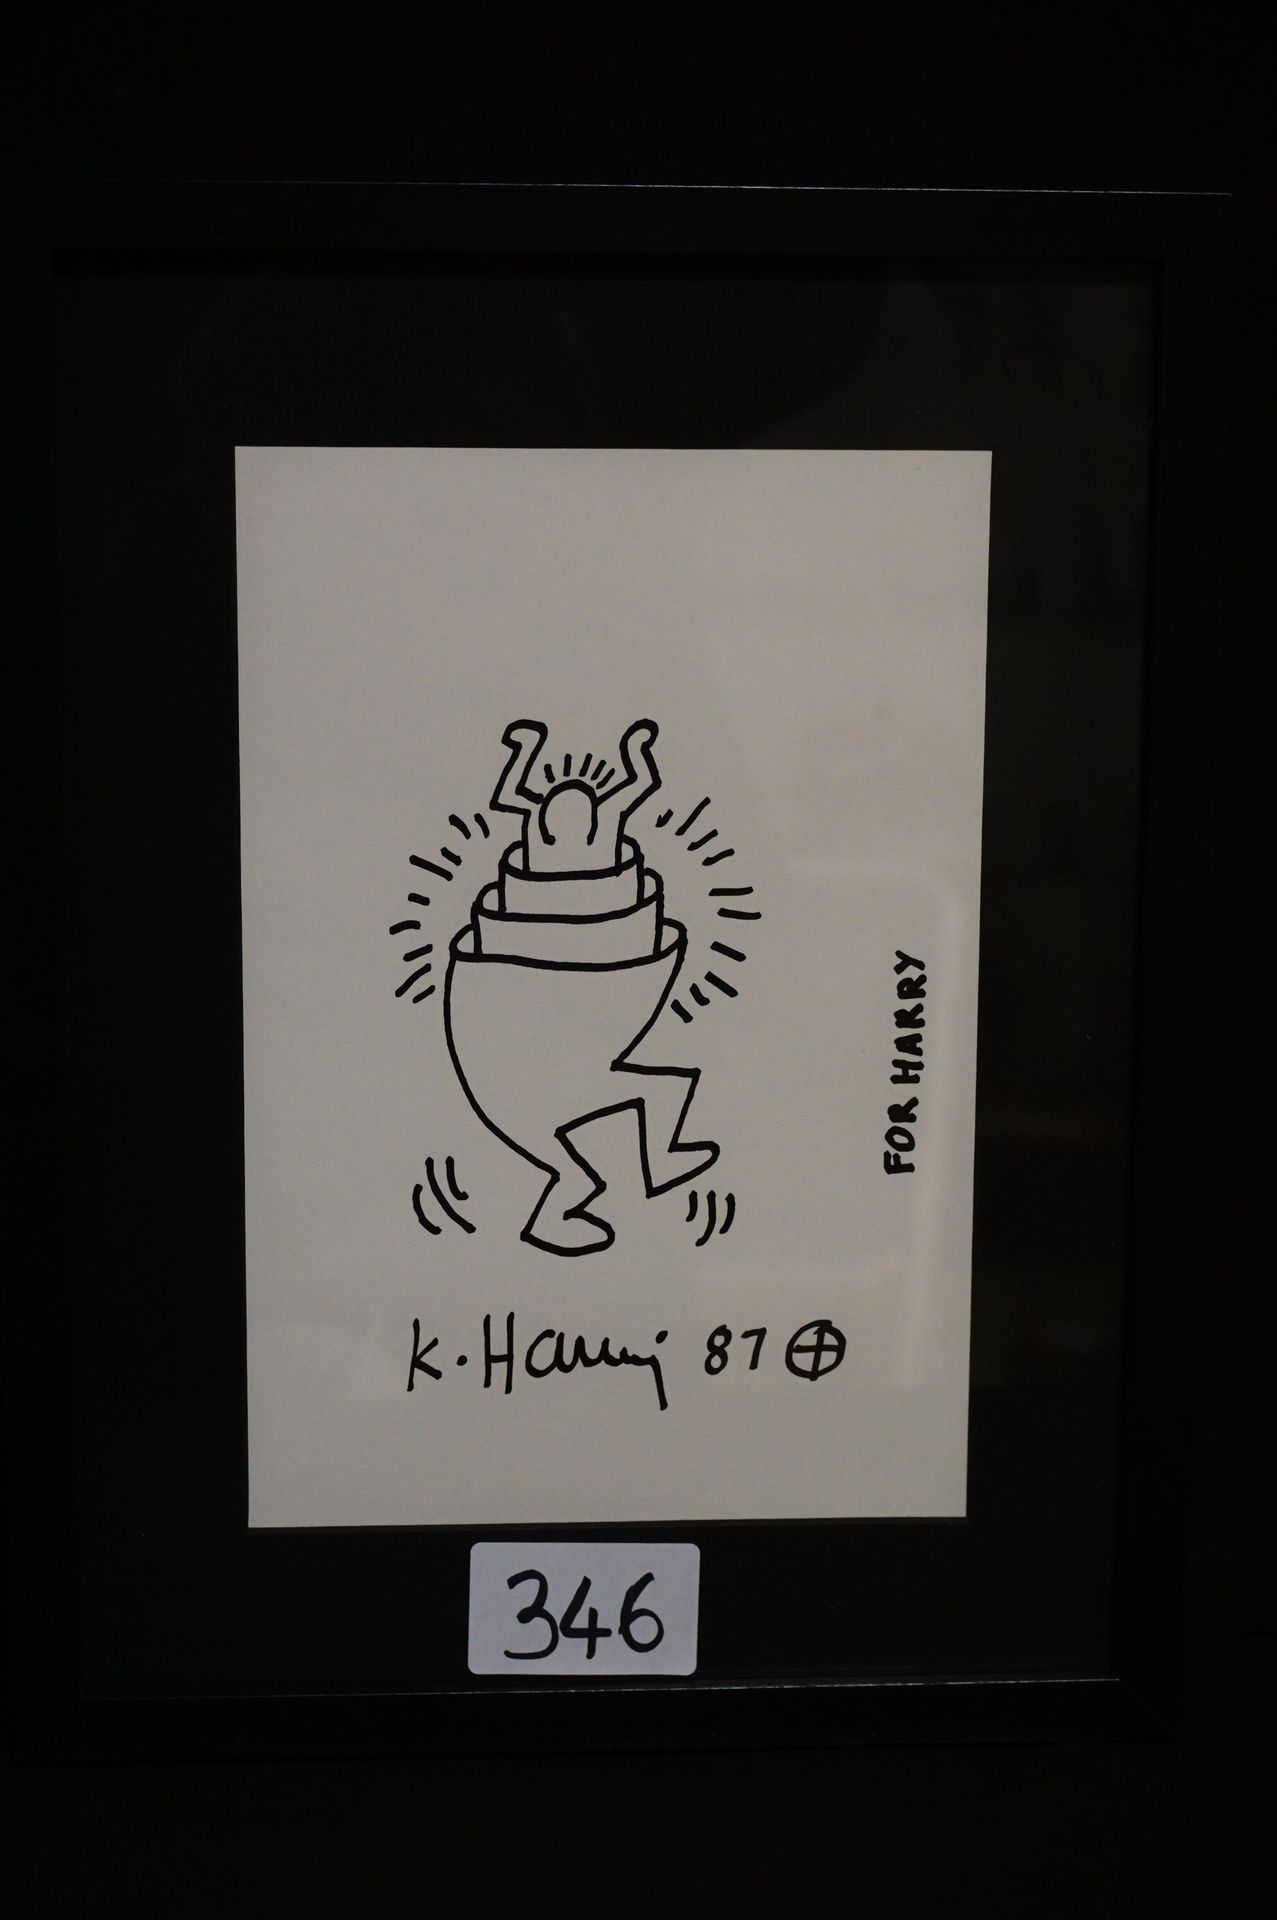 KEITH HARING (1958 - 1990) After - "Untitled" - Black marker on paper - Signed a&hellip;